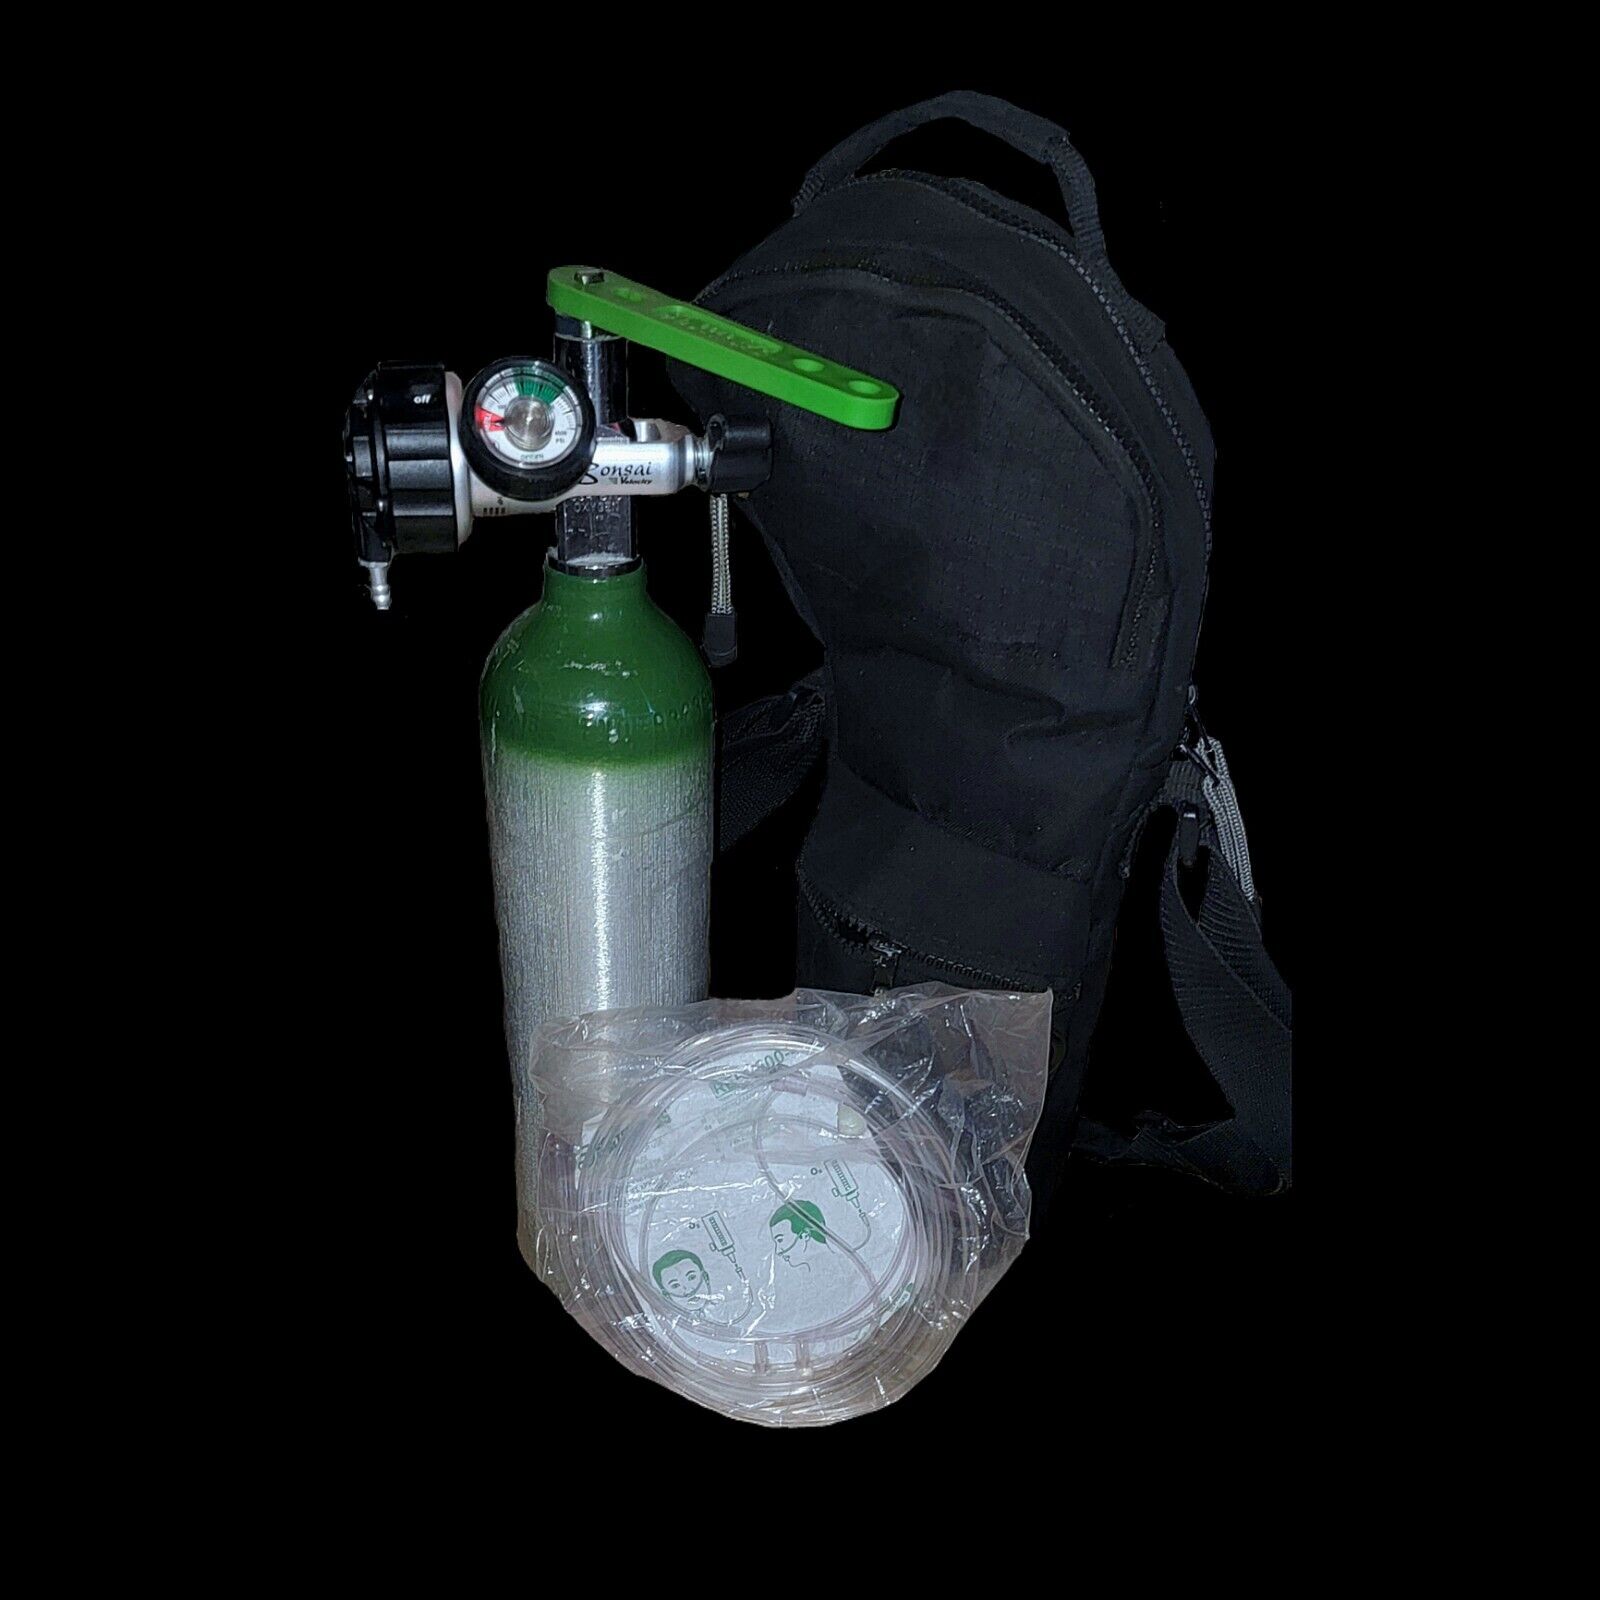 FULL Oxygen Tank With Regulator, Carry bag, Nasal Cannula & Tank Wrench